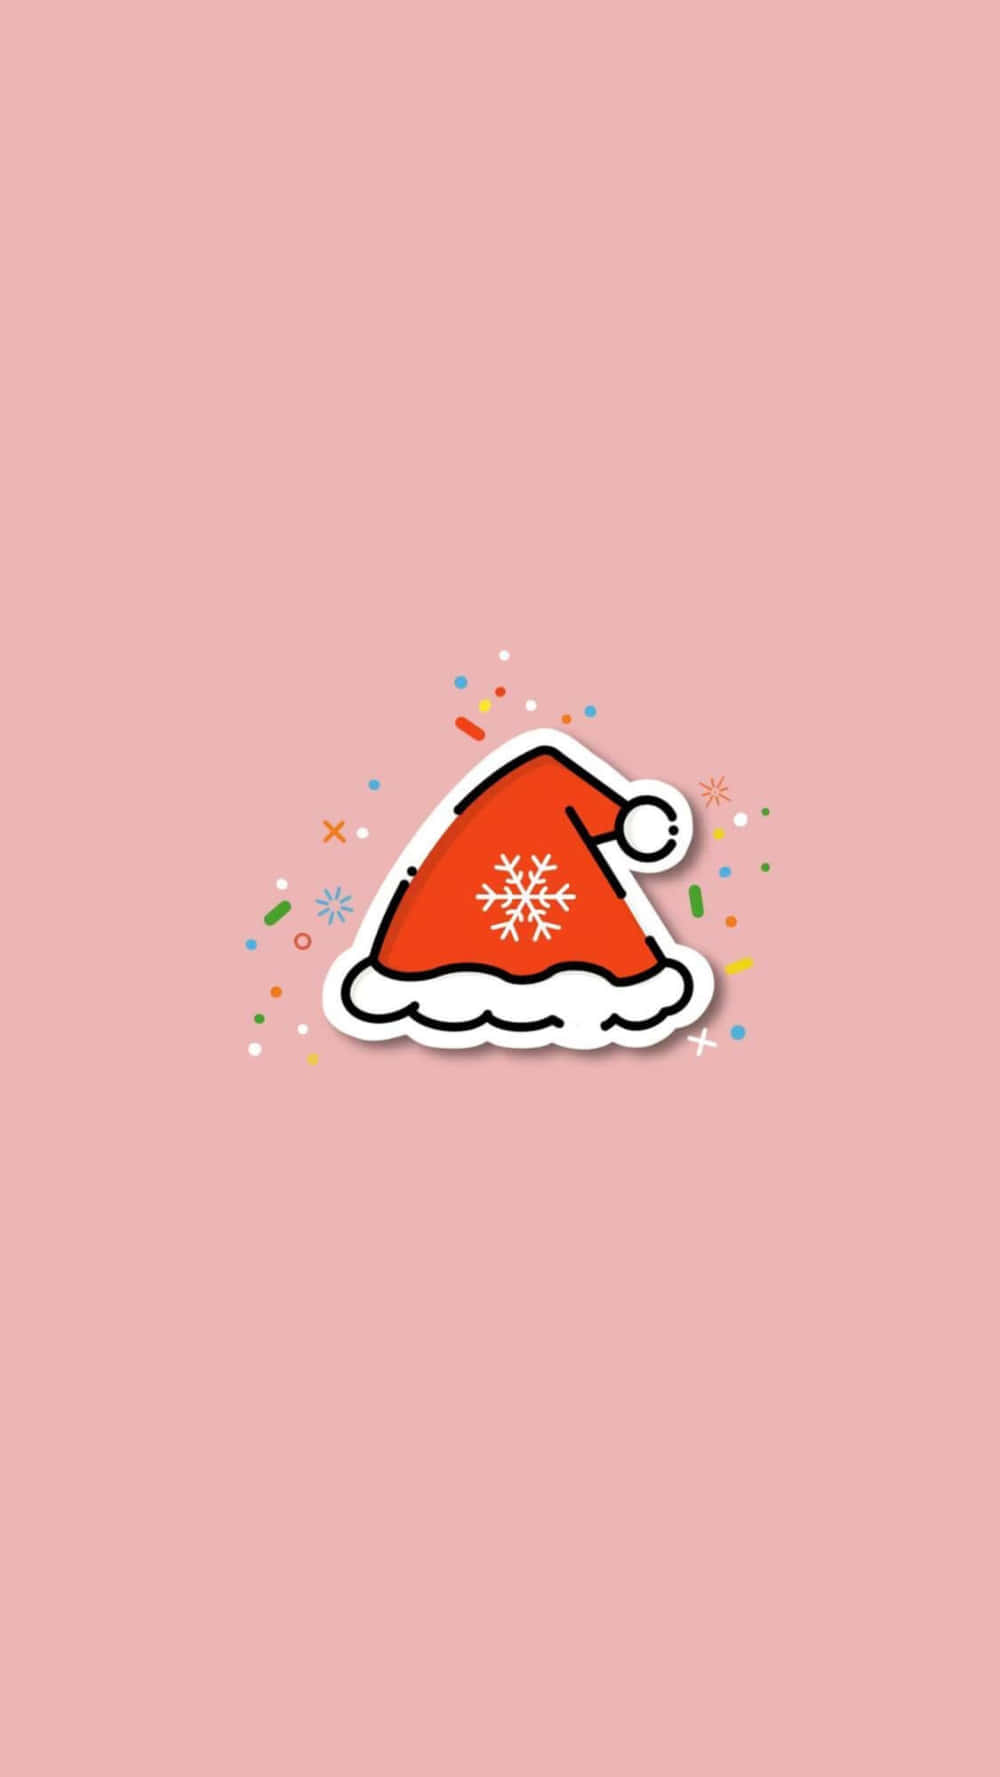 Simple Aesthetic Cute Christmas Santa Hat With A Snowflake Wallpaper